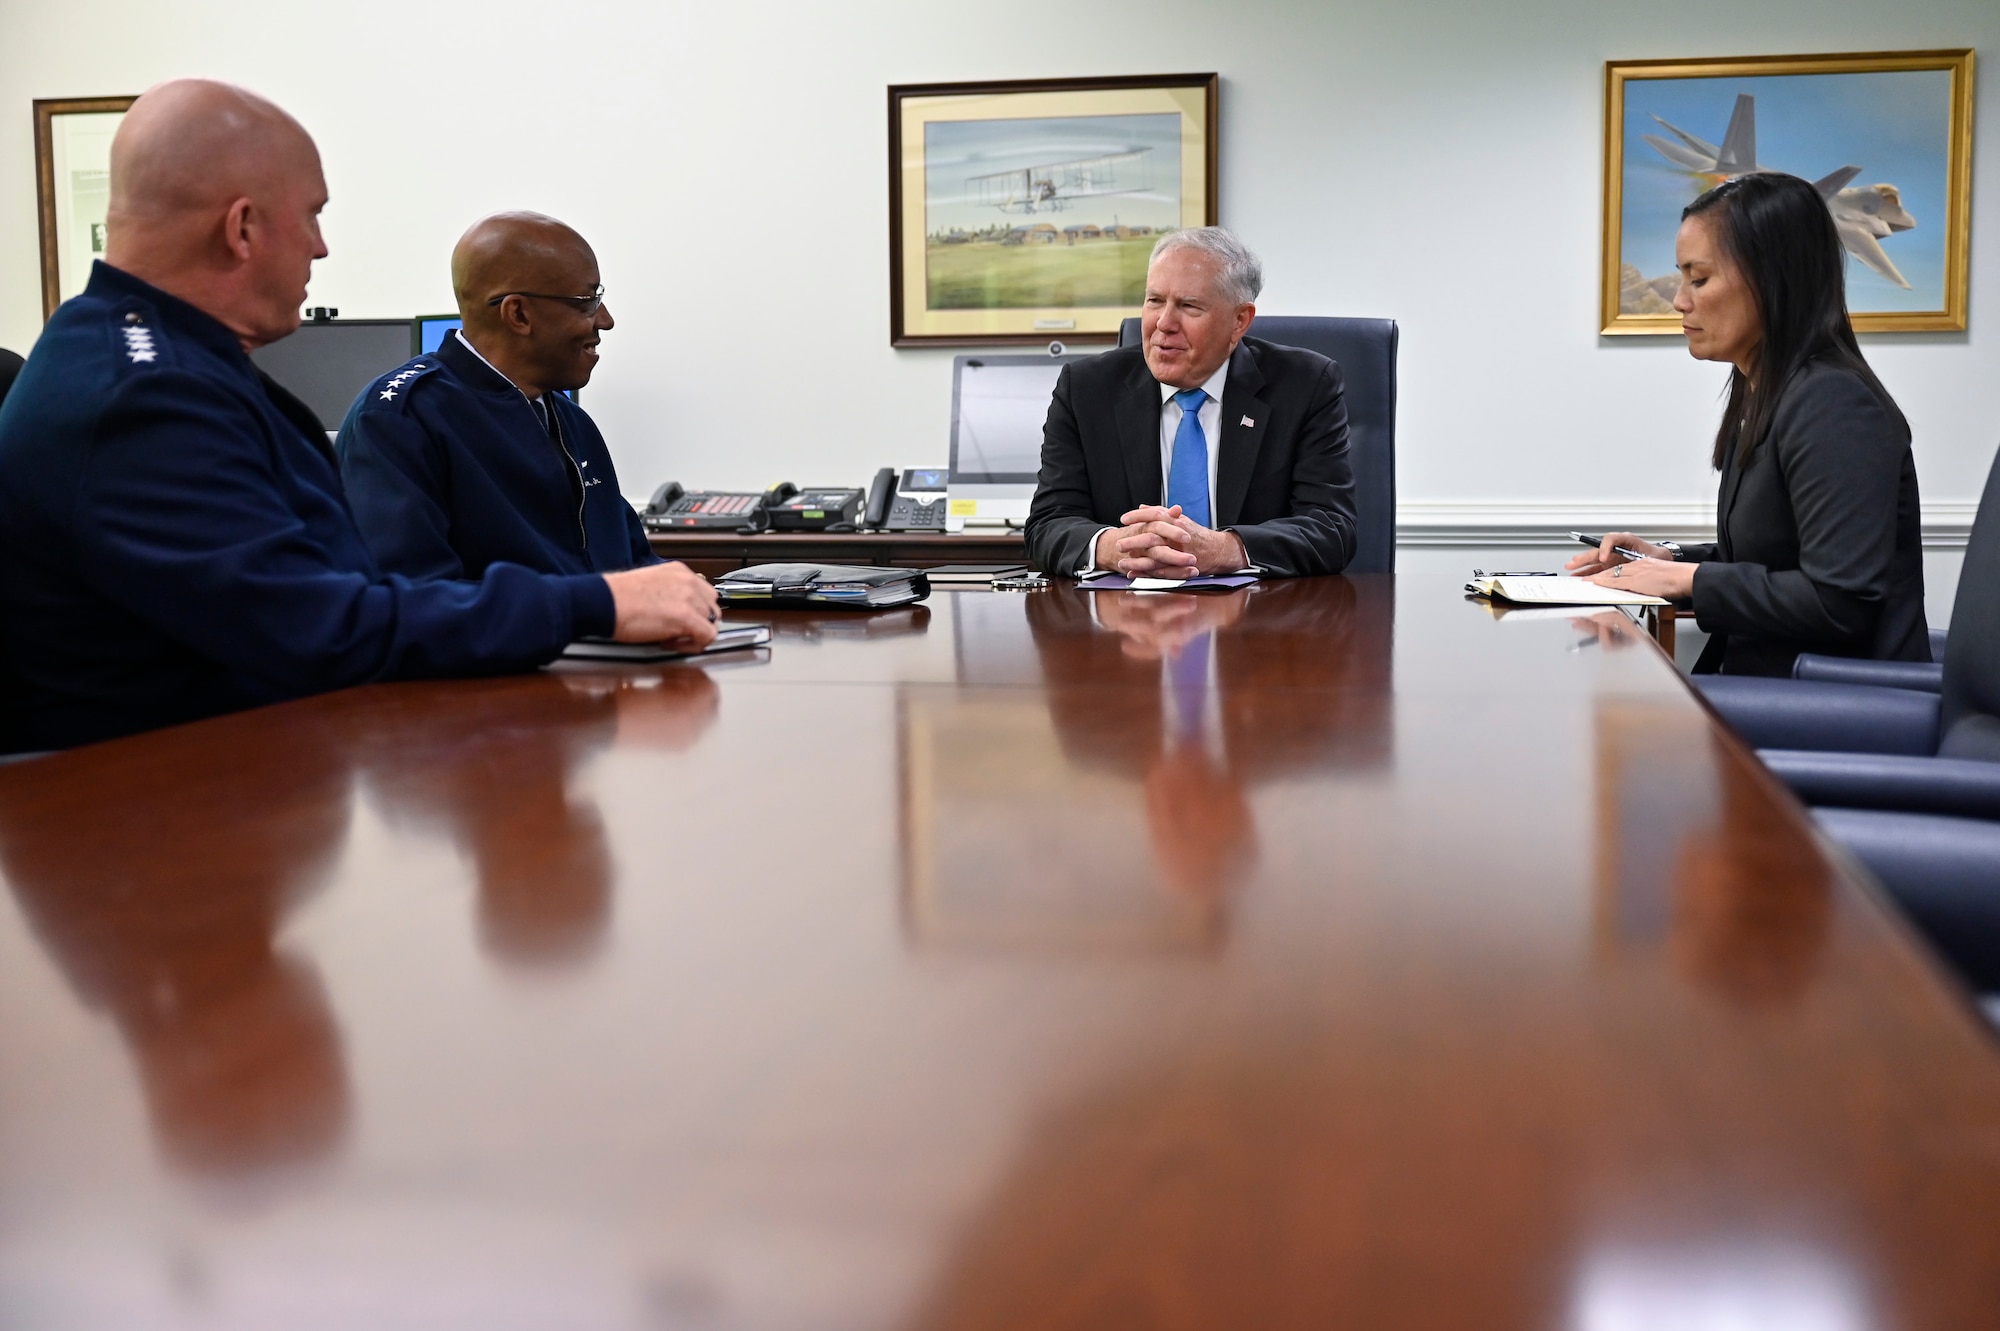 Secretary of the Air Force Frank Kendall speaks with Chief of Space Operations Gen. John W. “Jay” Raymond, Air Force Chief of Staff Gen. CQ Brown, Jr. and Under Secretary of the Air Force Gina Ortiz Jones during his first meeting with the Department of the Air Force’s service chiefs at the Pentagon, Arlington, Va., July 28, 2021. (U.S. Air Force photo by Eric Dietrich)